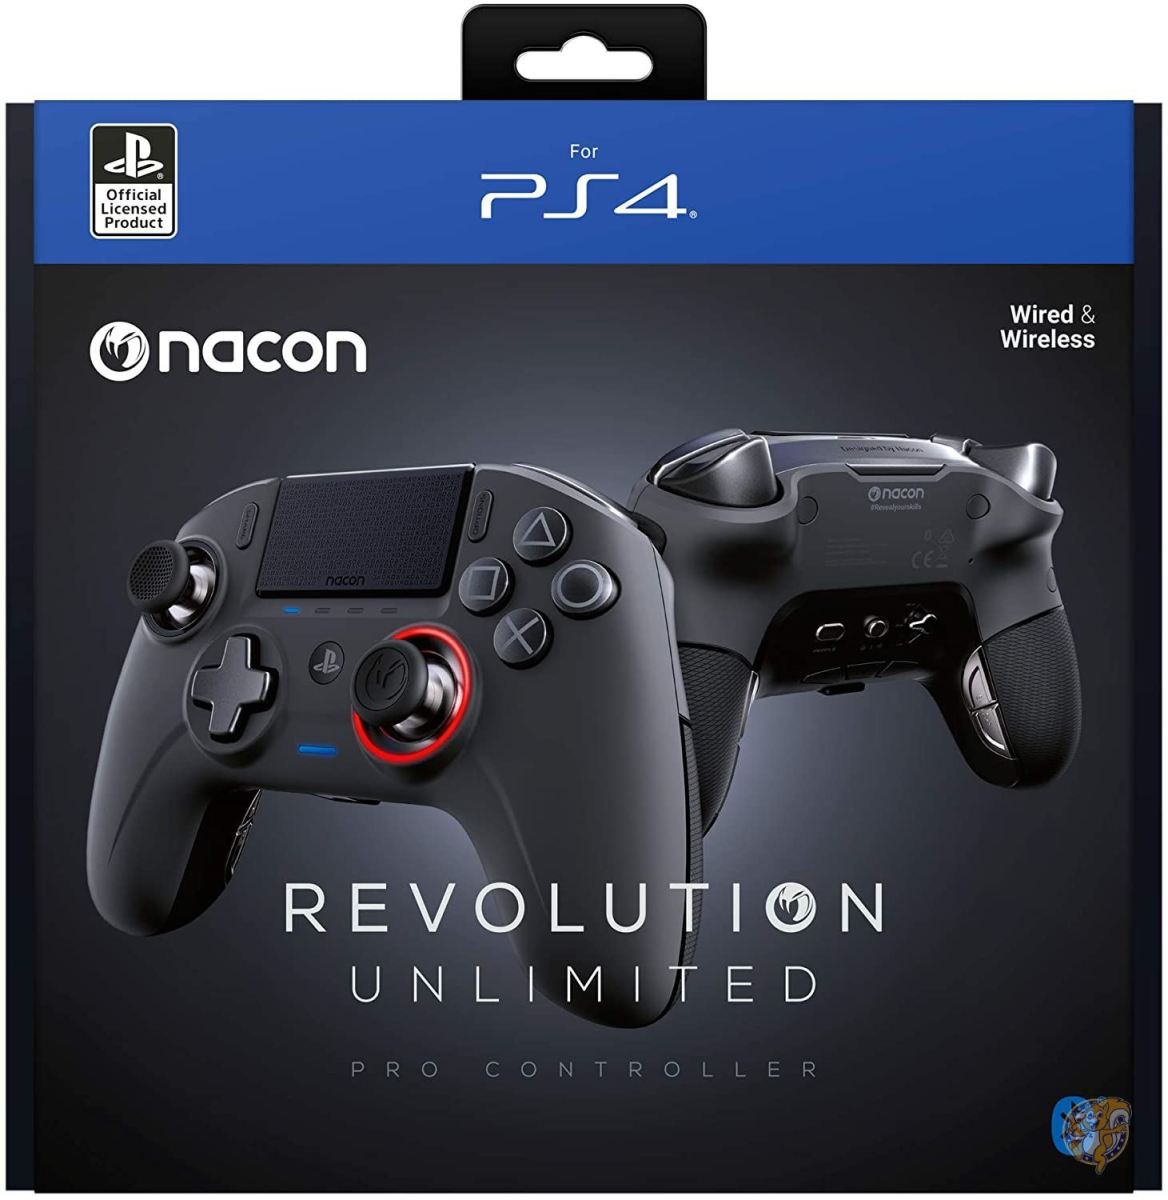 NACON Controller Esports Revolution Unlimited Pro V3 PS4 Playstation 4 / PC - Wireless/Wired - Nacon-31160 [2371-1] 送料無料